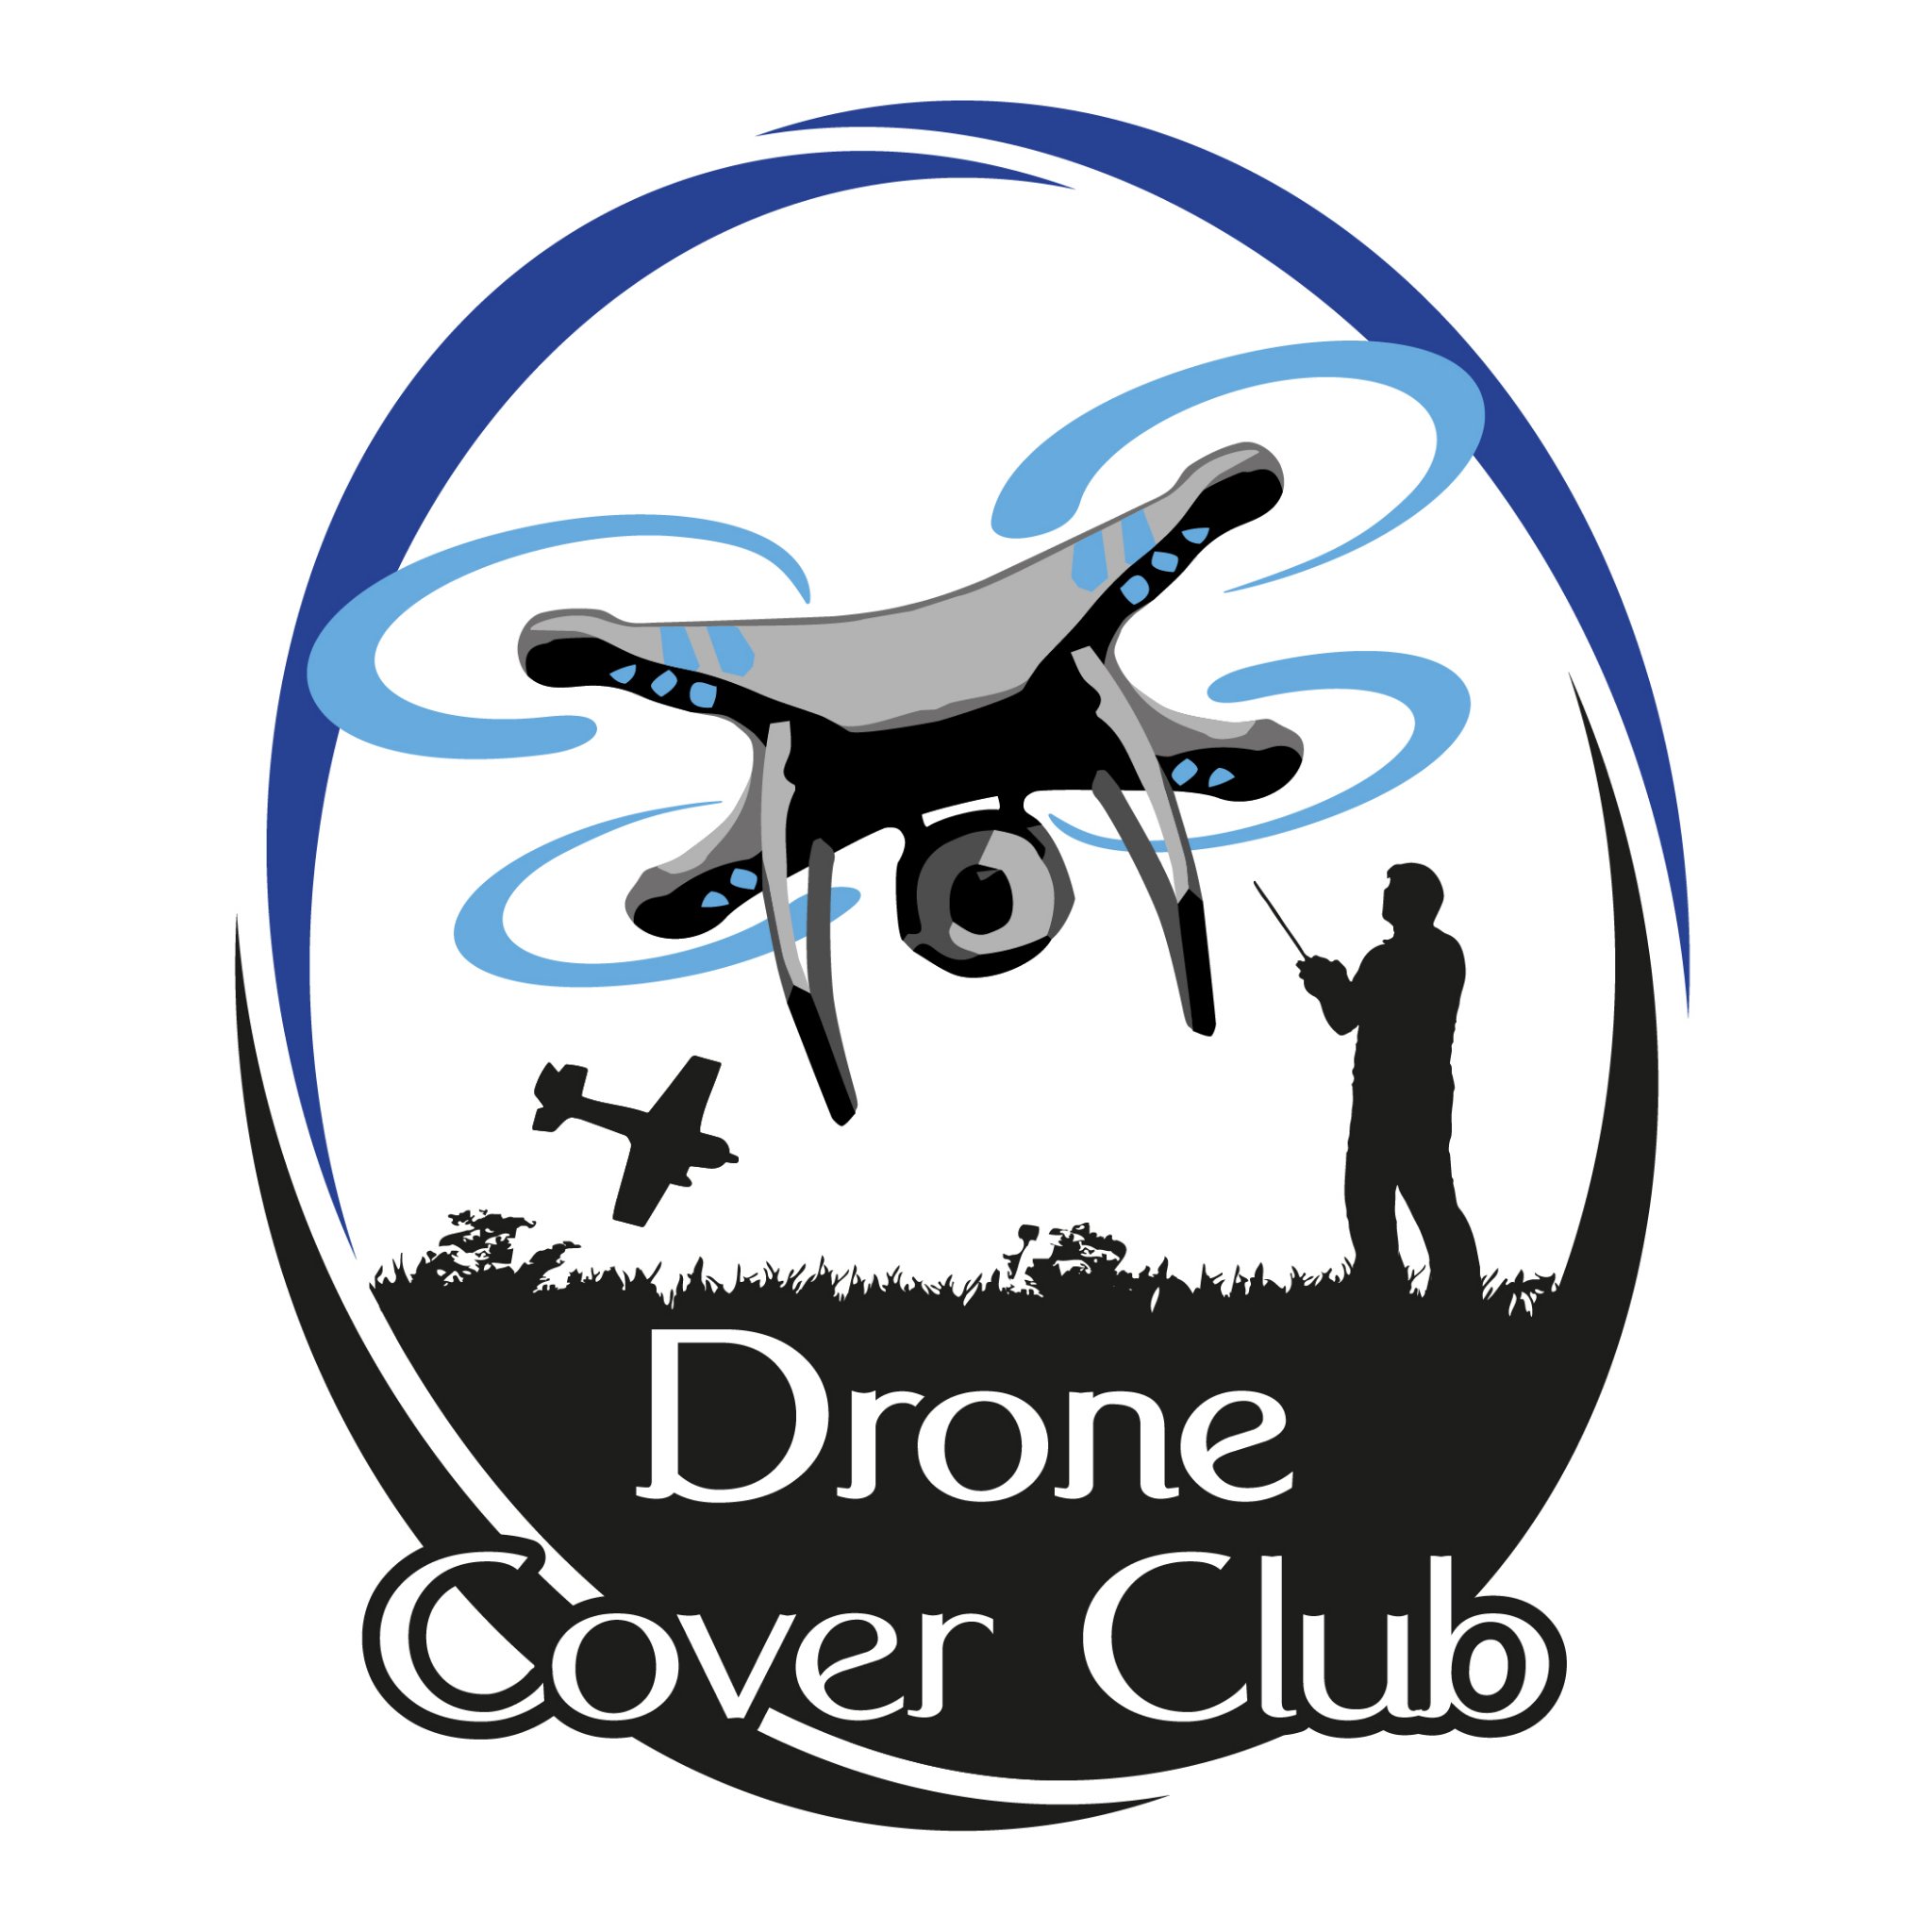 Drone enthusiasts memberships - we offer members a great range of benefits including cost effective insurances.

#Drone #Drones